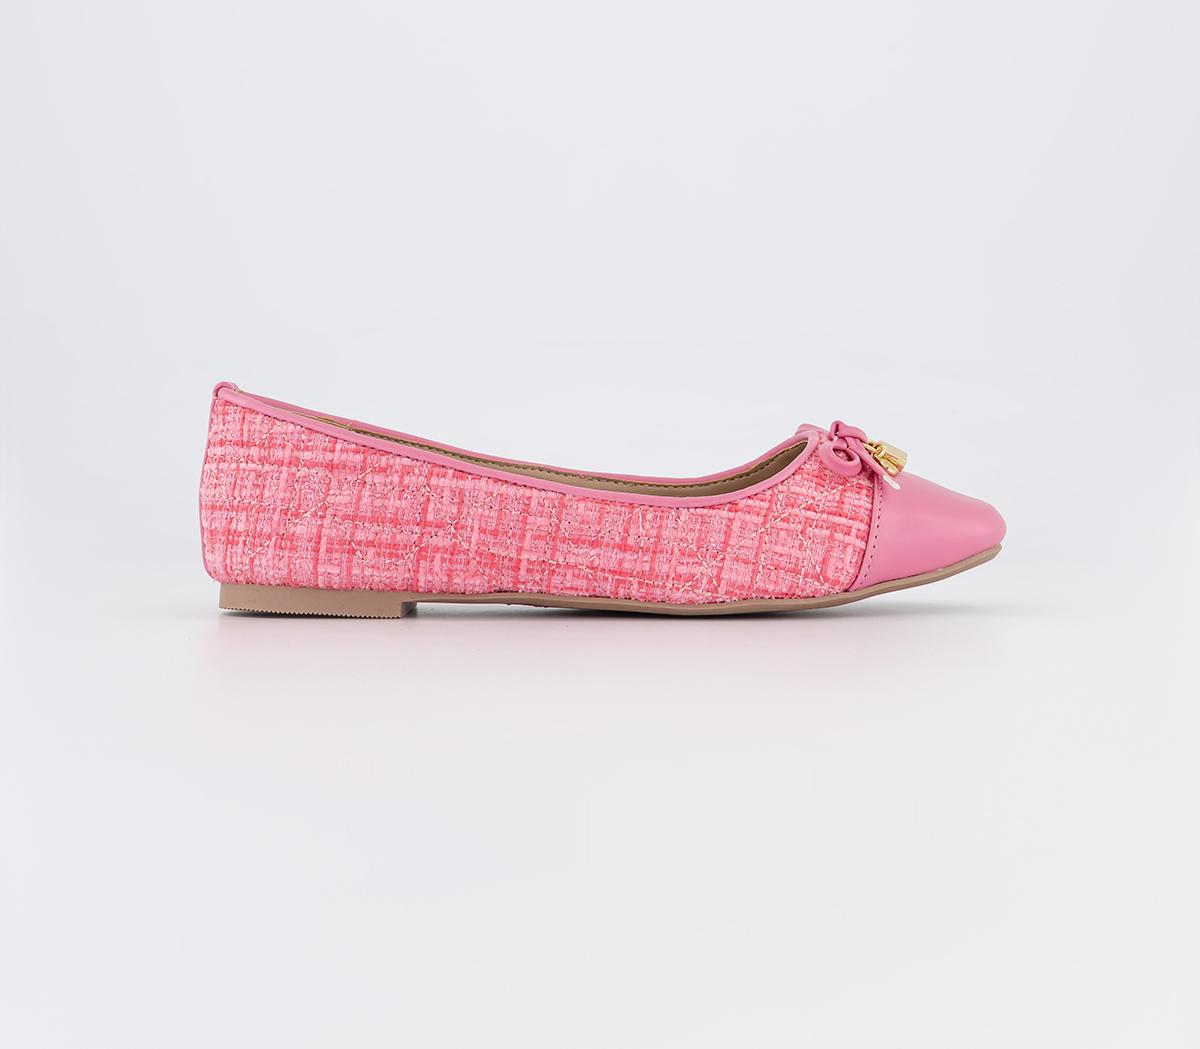 OFFICE Forevermore Charm Ballet Pumps Pink - Flat Shoes for Women